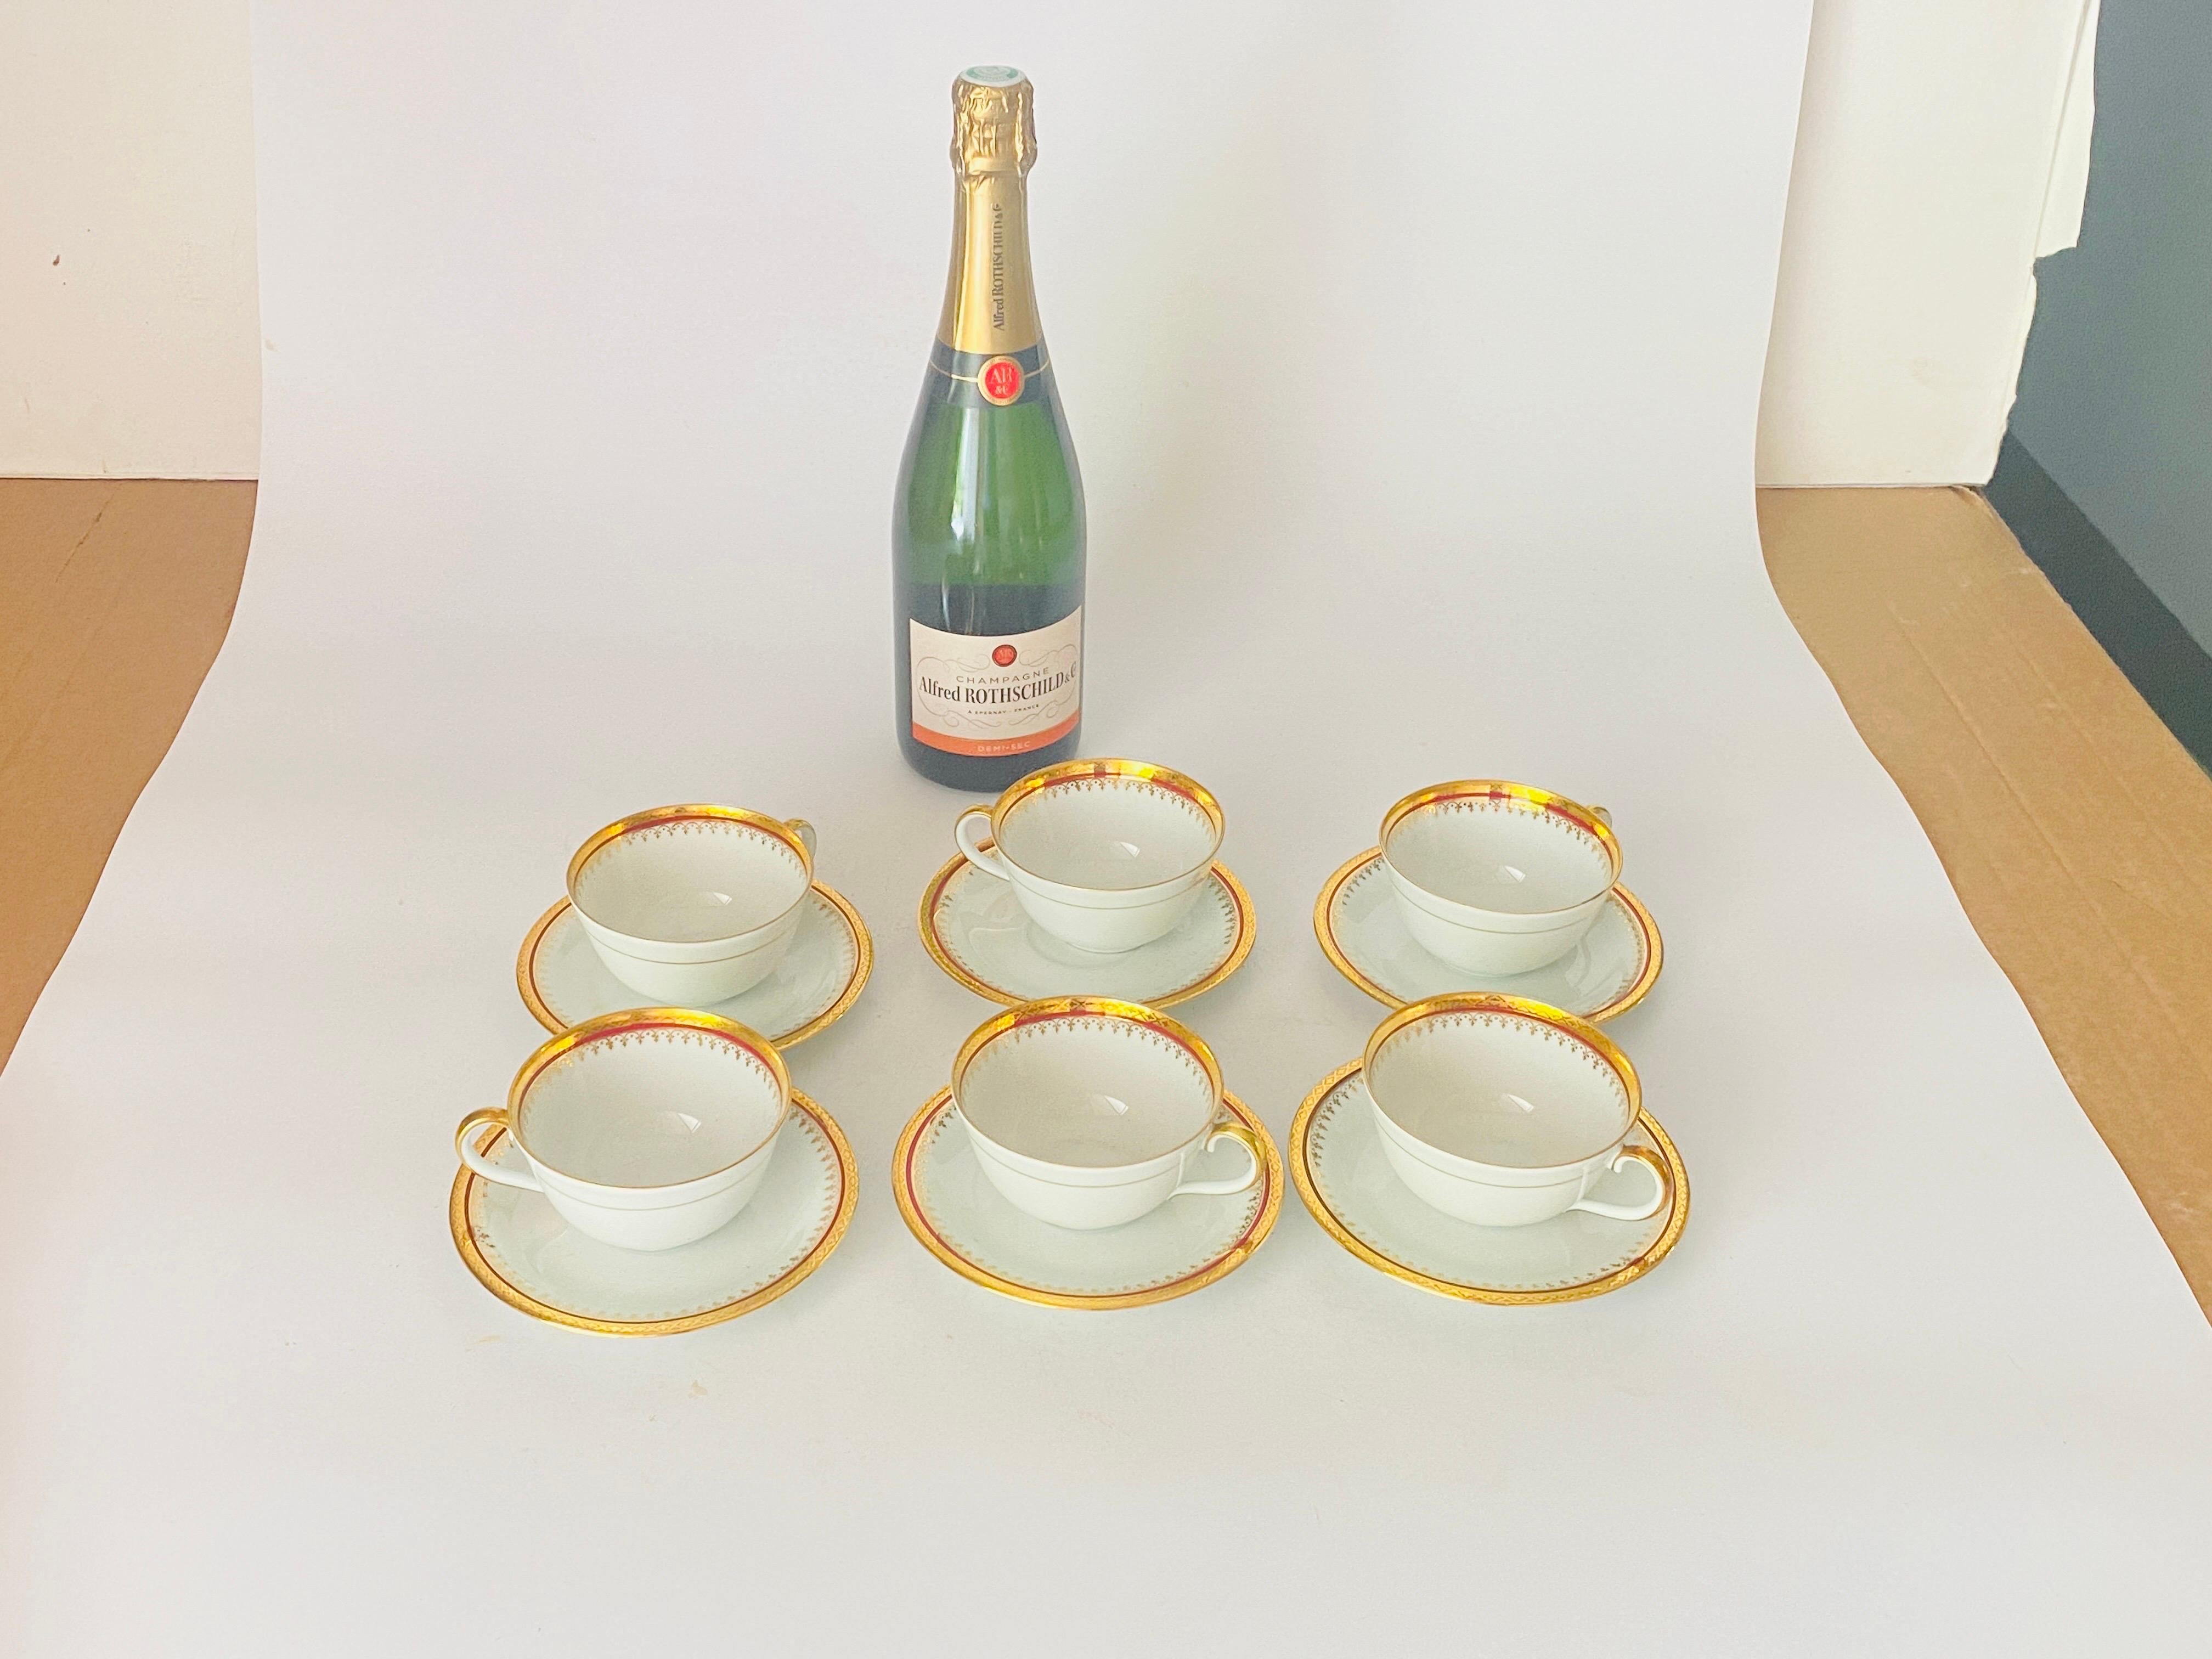 Gold Plate Midcentury Limoges Coffee Cup and under Plates in Porcelain and Gold 12 Pieces